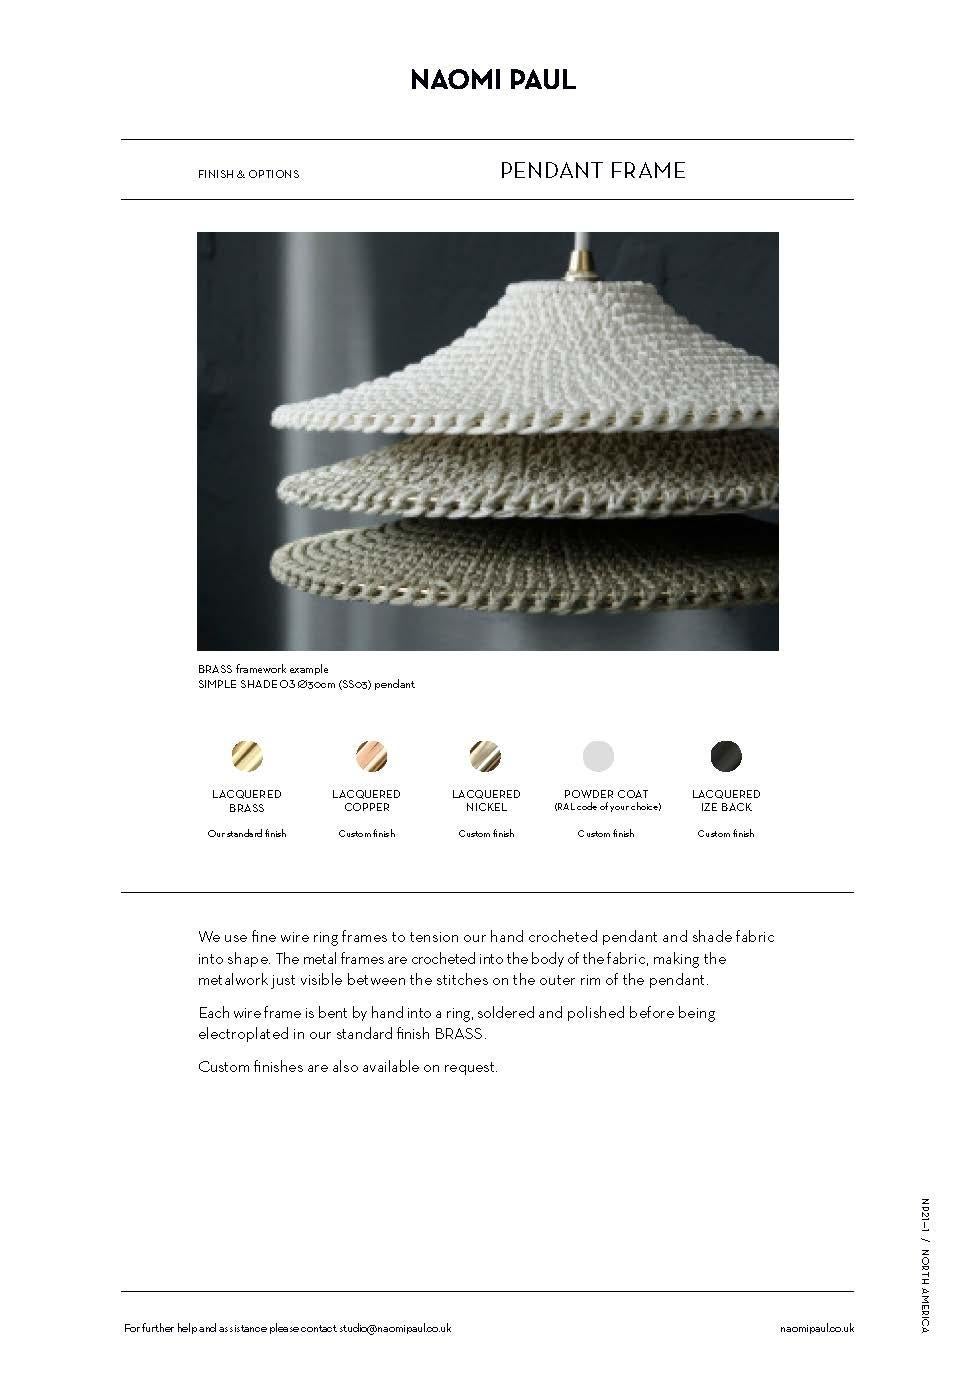 British BAMBOO SOLITAIRE 01 Pendant Light Ø50cm/19.7in, Hand Crocheted in Bamboo Paper